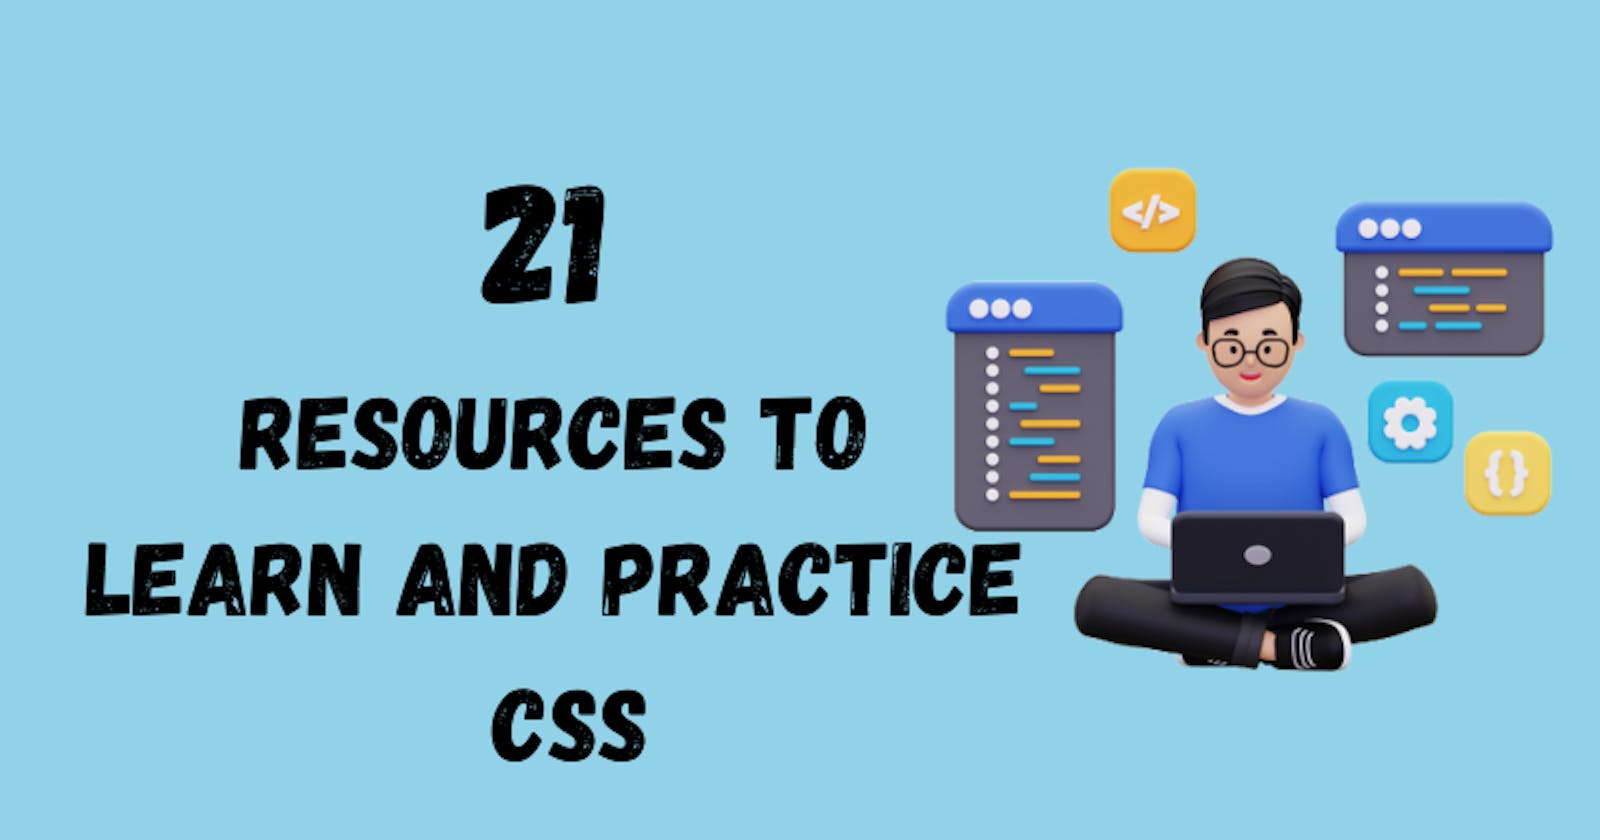 21 Resources to Learn And Practice Your CSS Skills